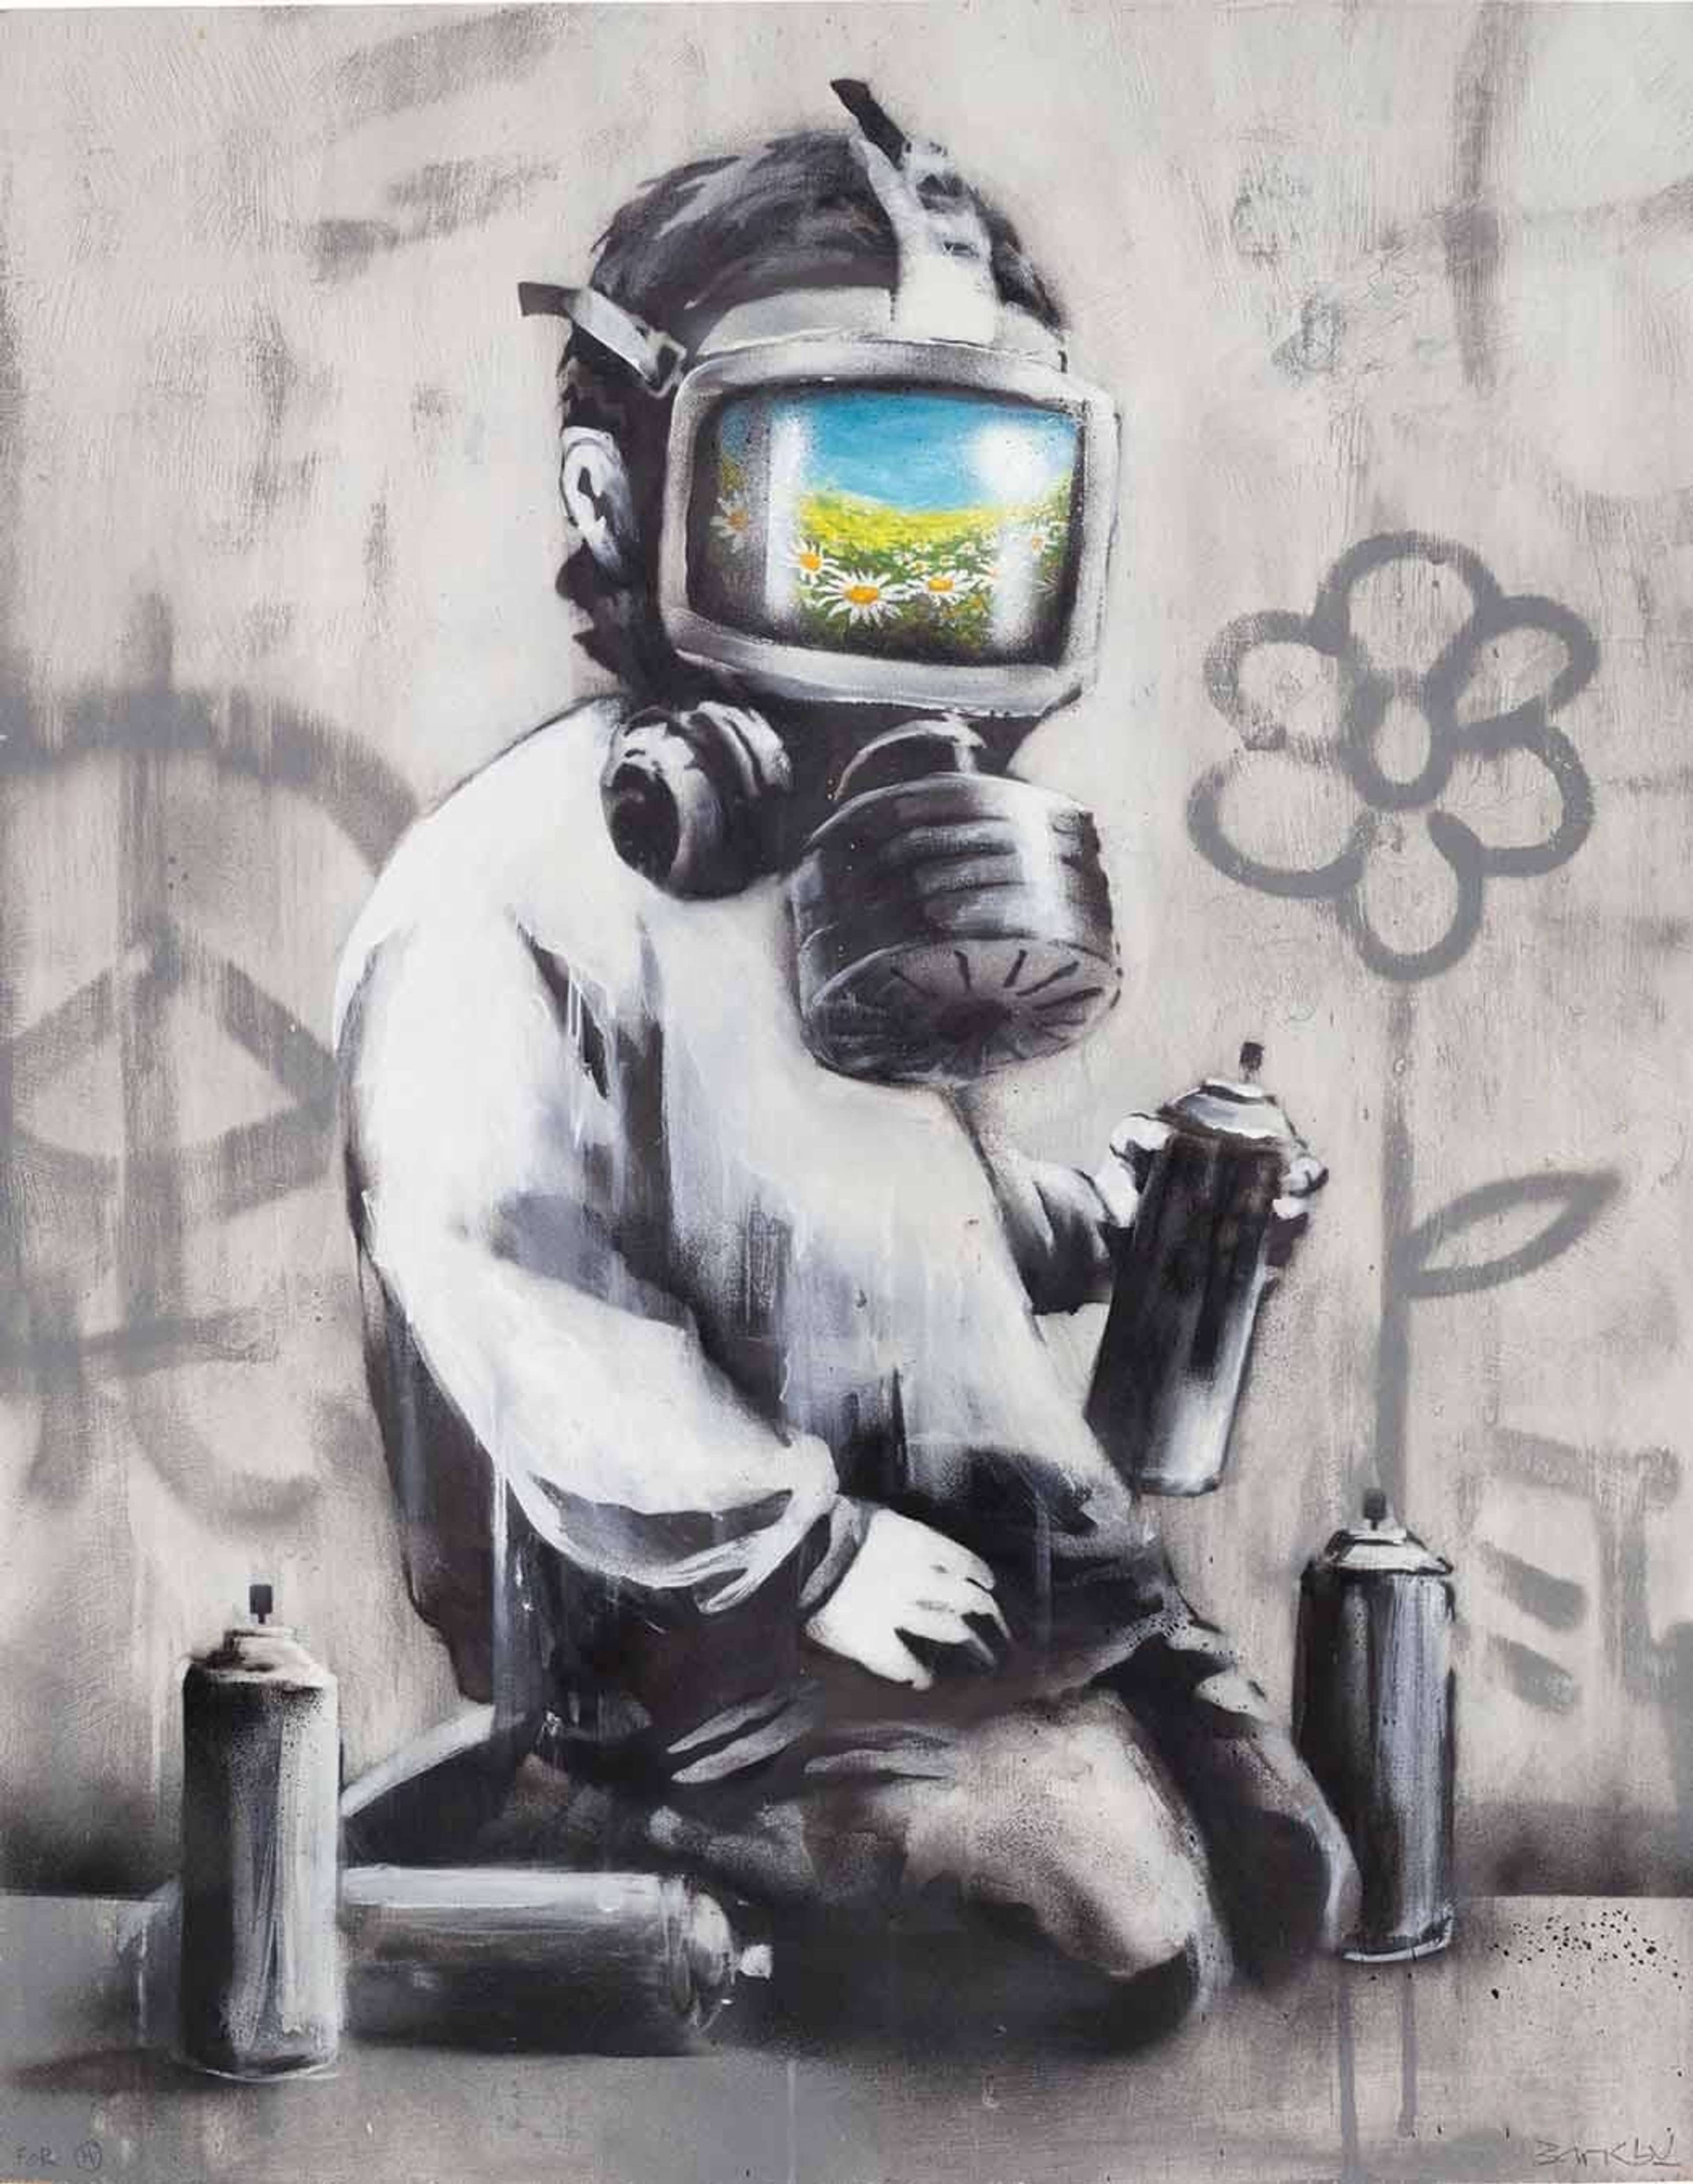 Banksy's Gas Mask Boy. A spray paint work of a child holding paint cans, painting the wall with graffiti while wearing a gas mask with a colorful landscape on its visor.